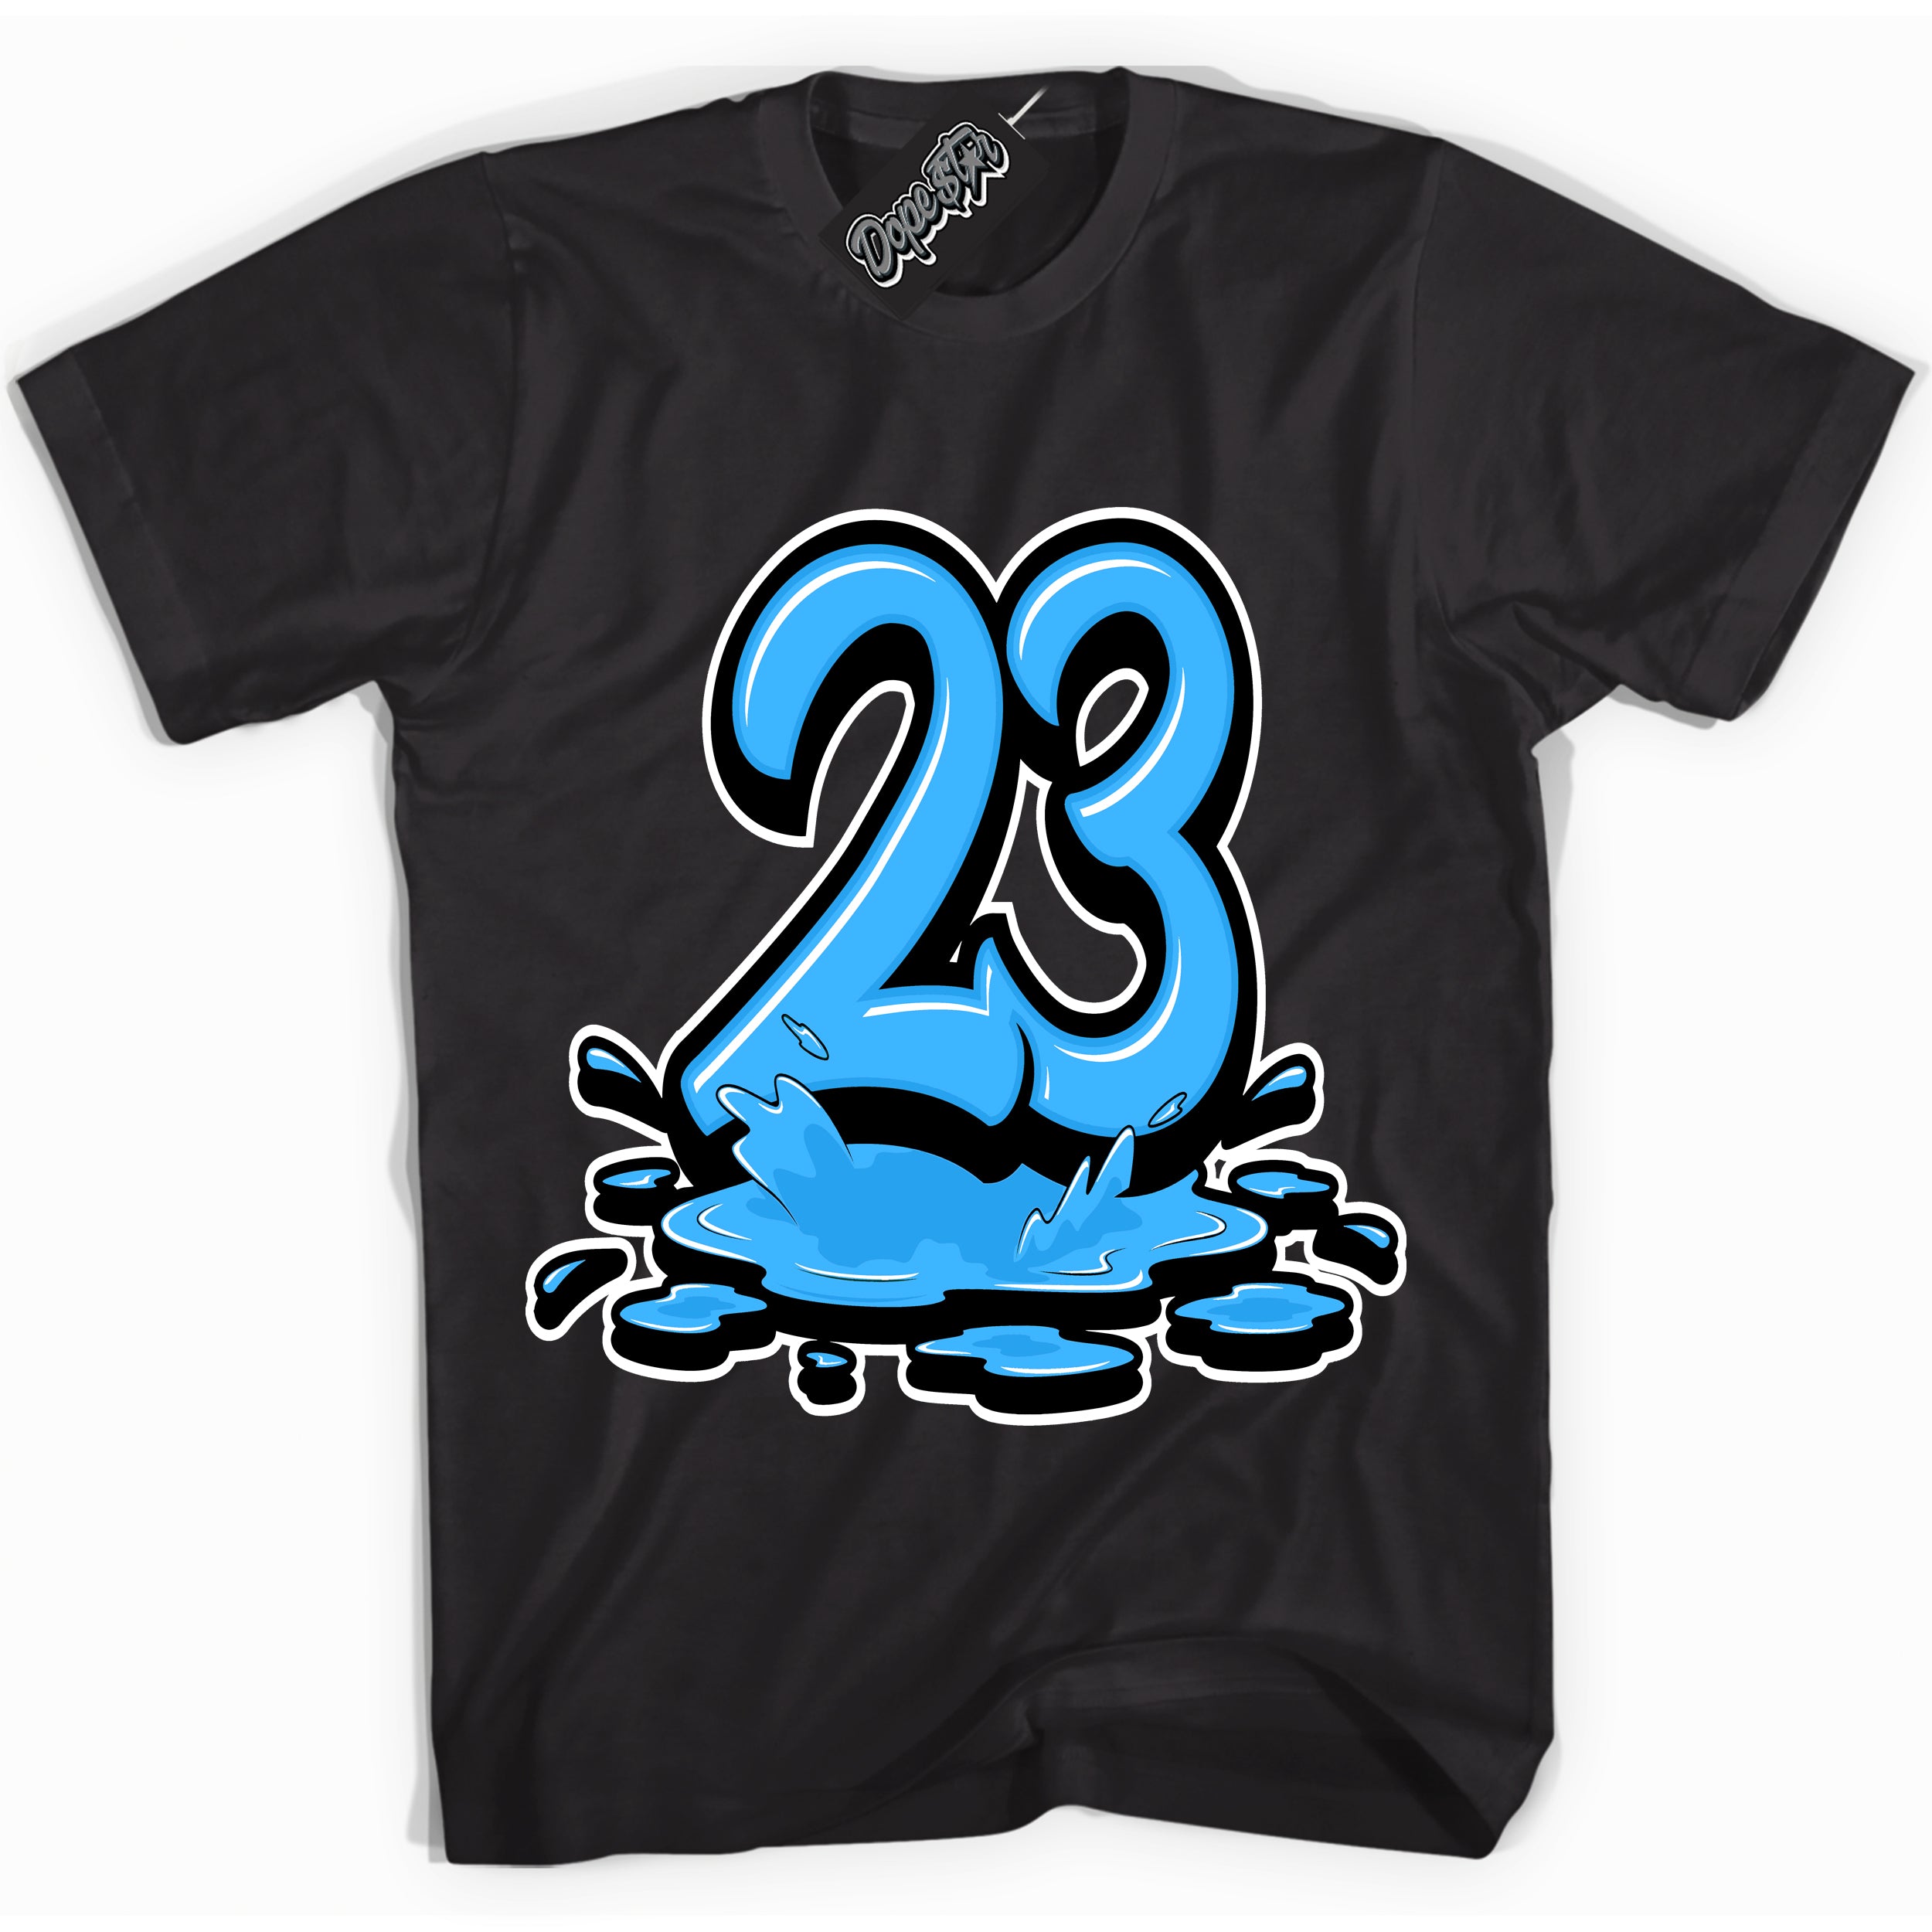 Cool Black graphic tee with “ 23 Melting ” design, that perfectly matches Powder Blue 9s sneakers 